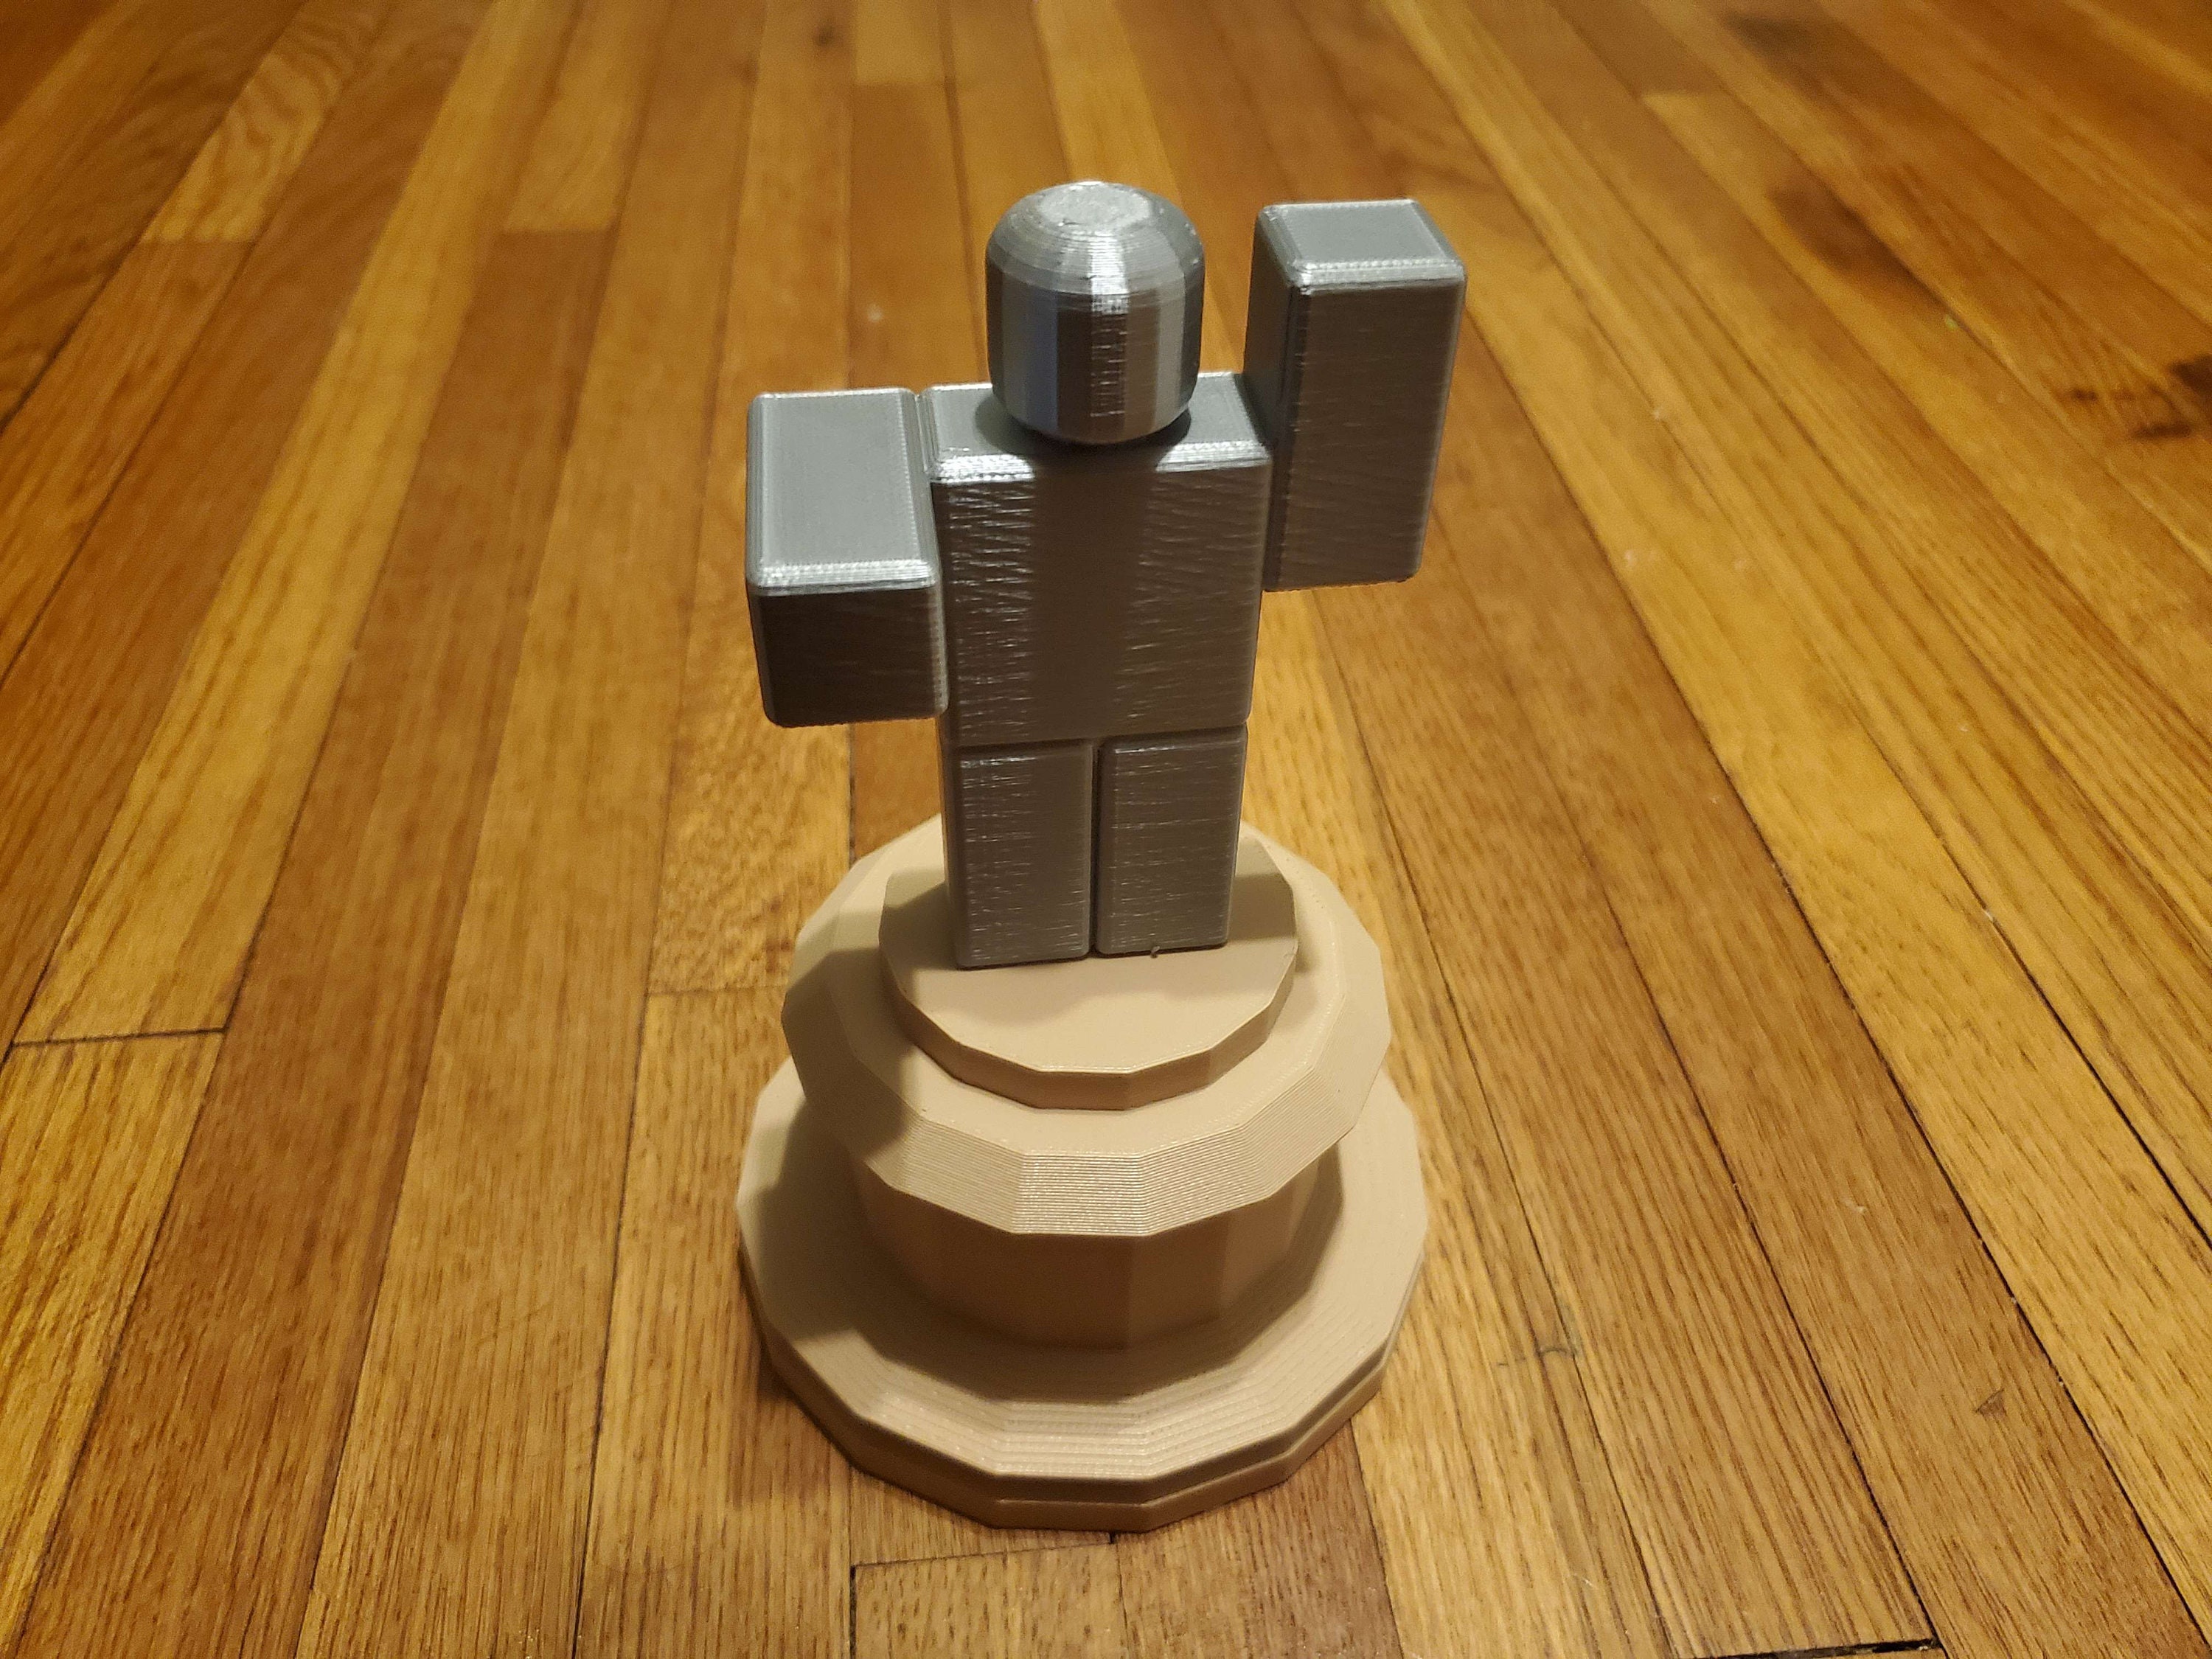 Roblox, Doors, Crucifix - Game Inspired 3D Printed, 6 Tall Wood PLA  filament